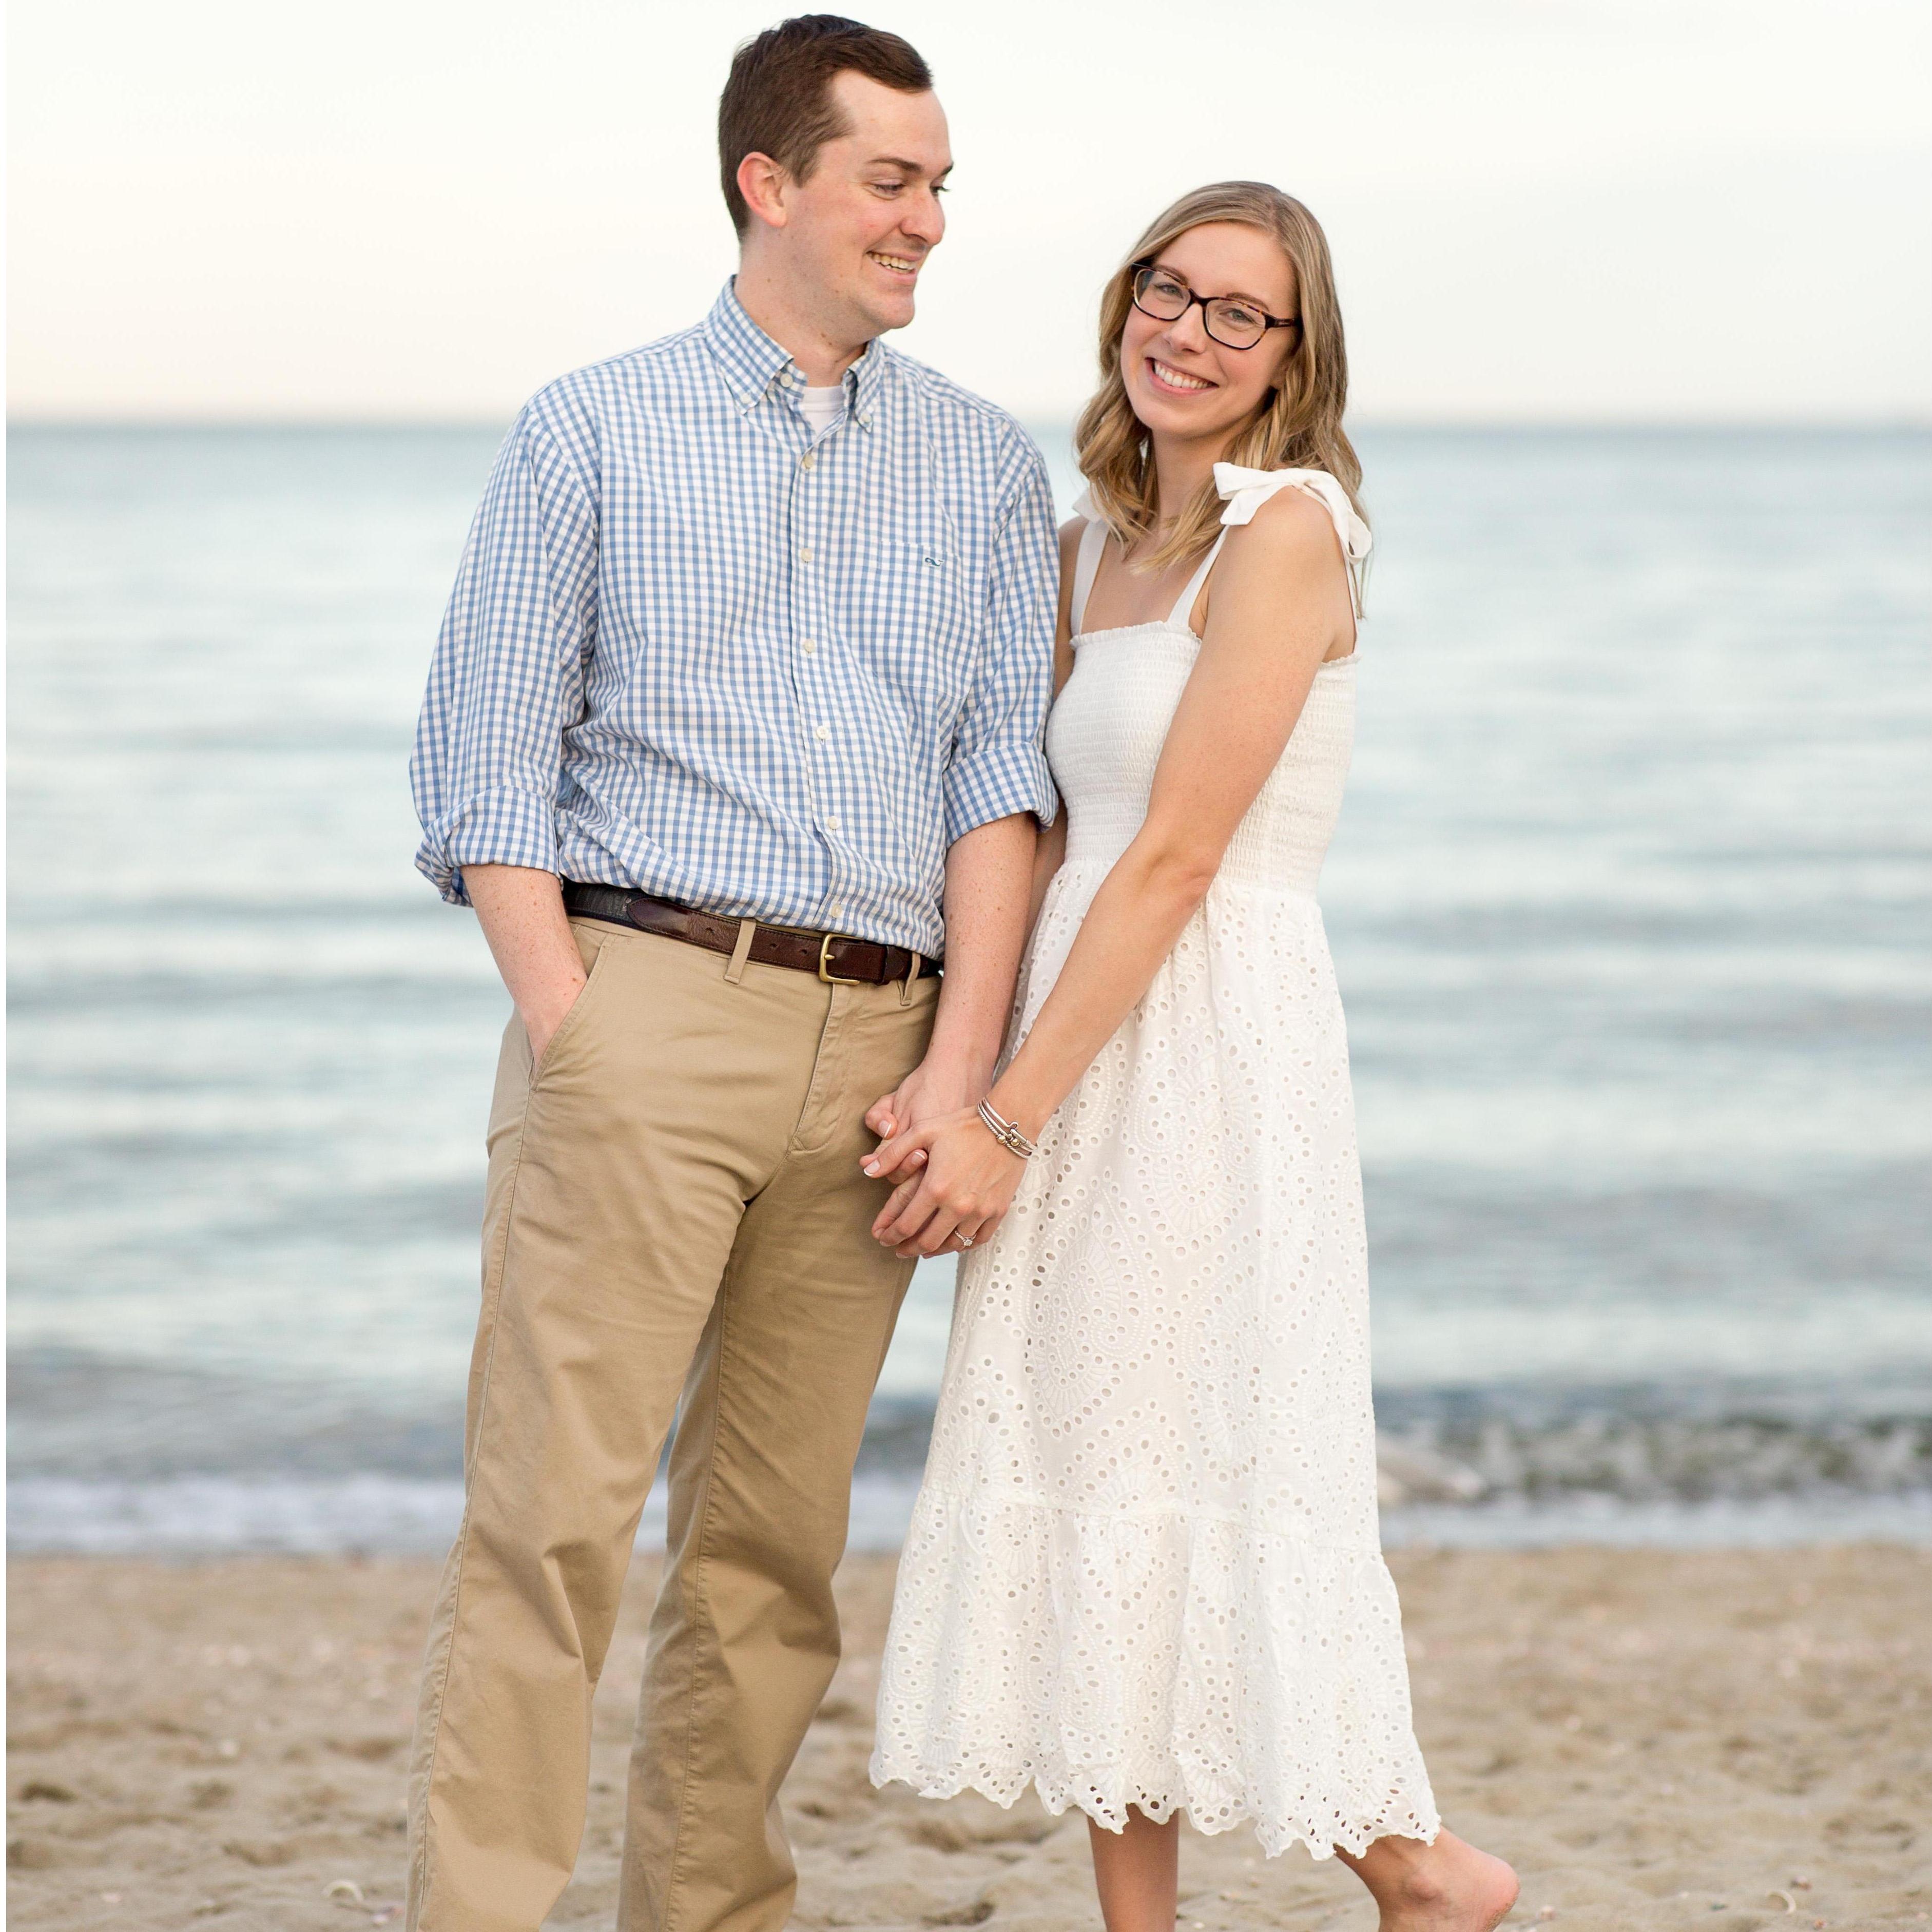 A photo from our engagement shoot at Penfield Beach in Fairfield, CT